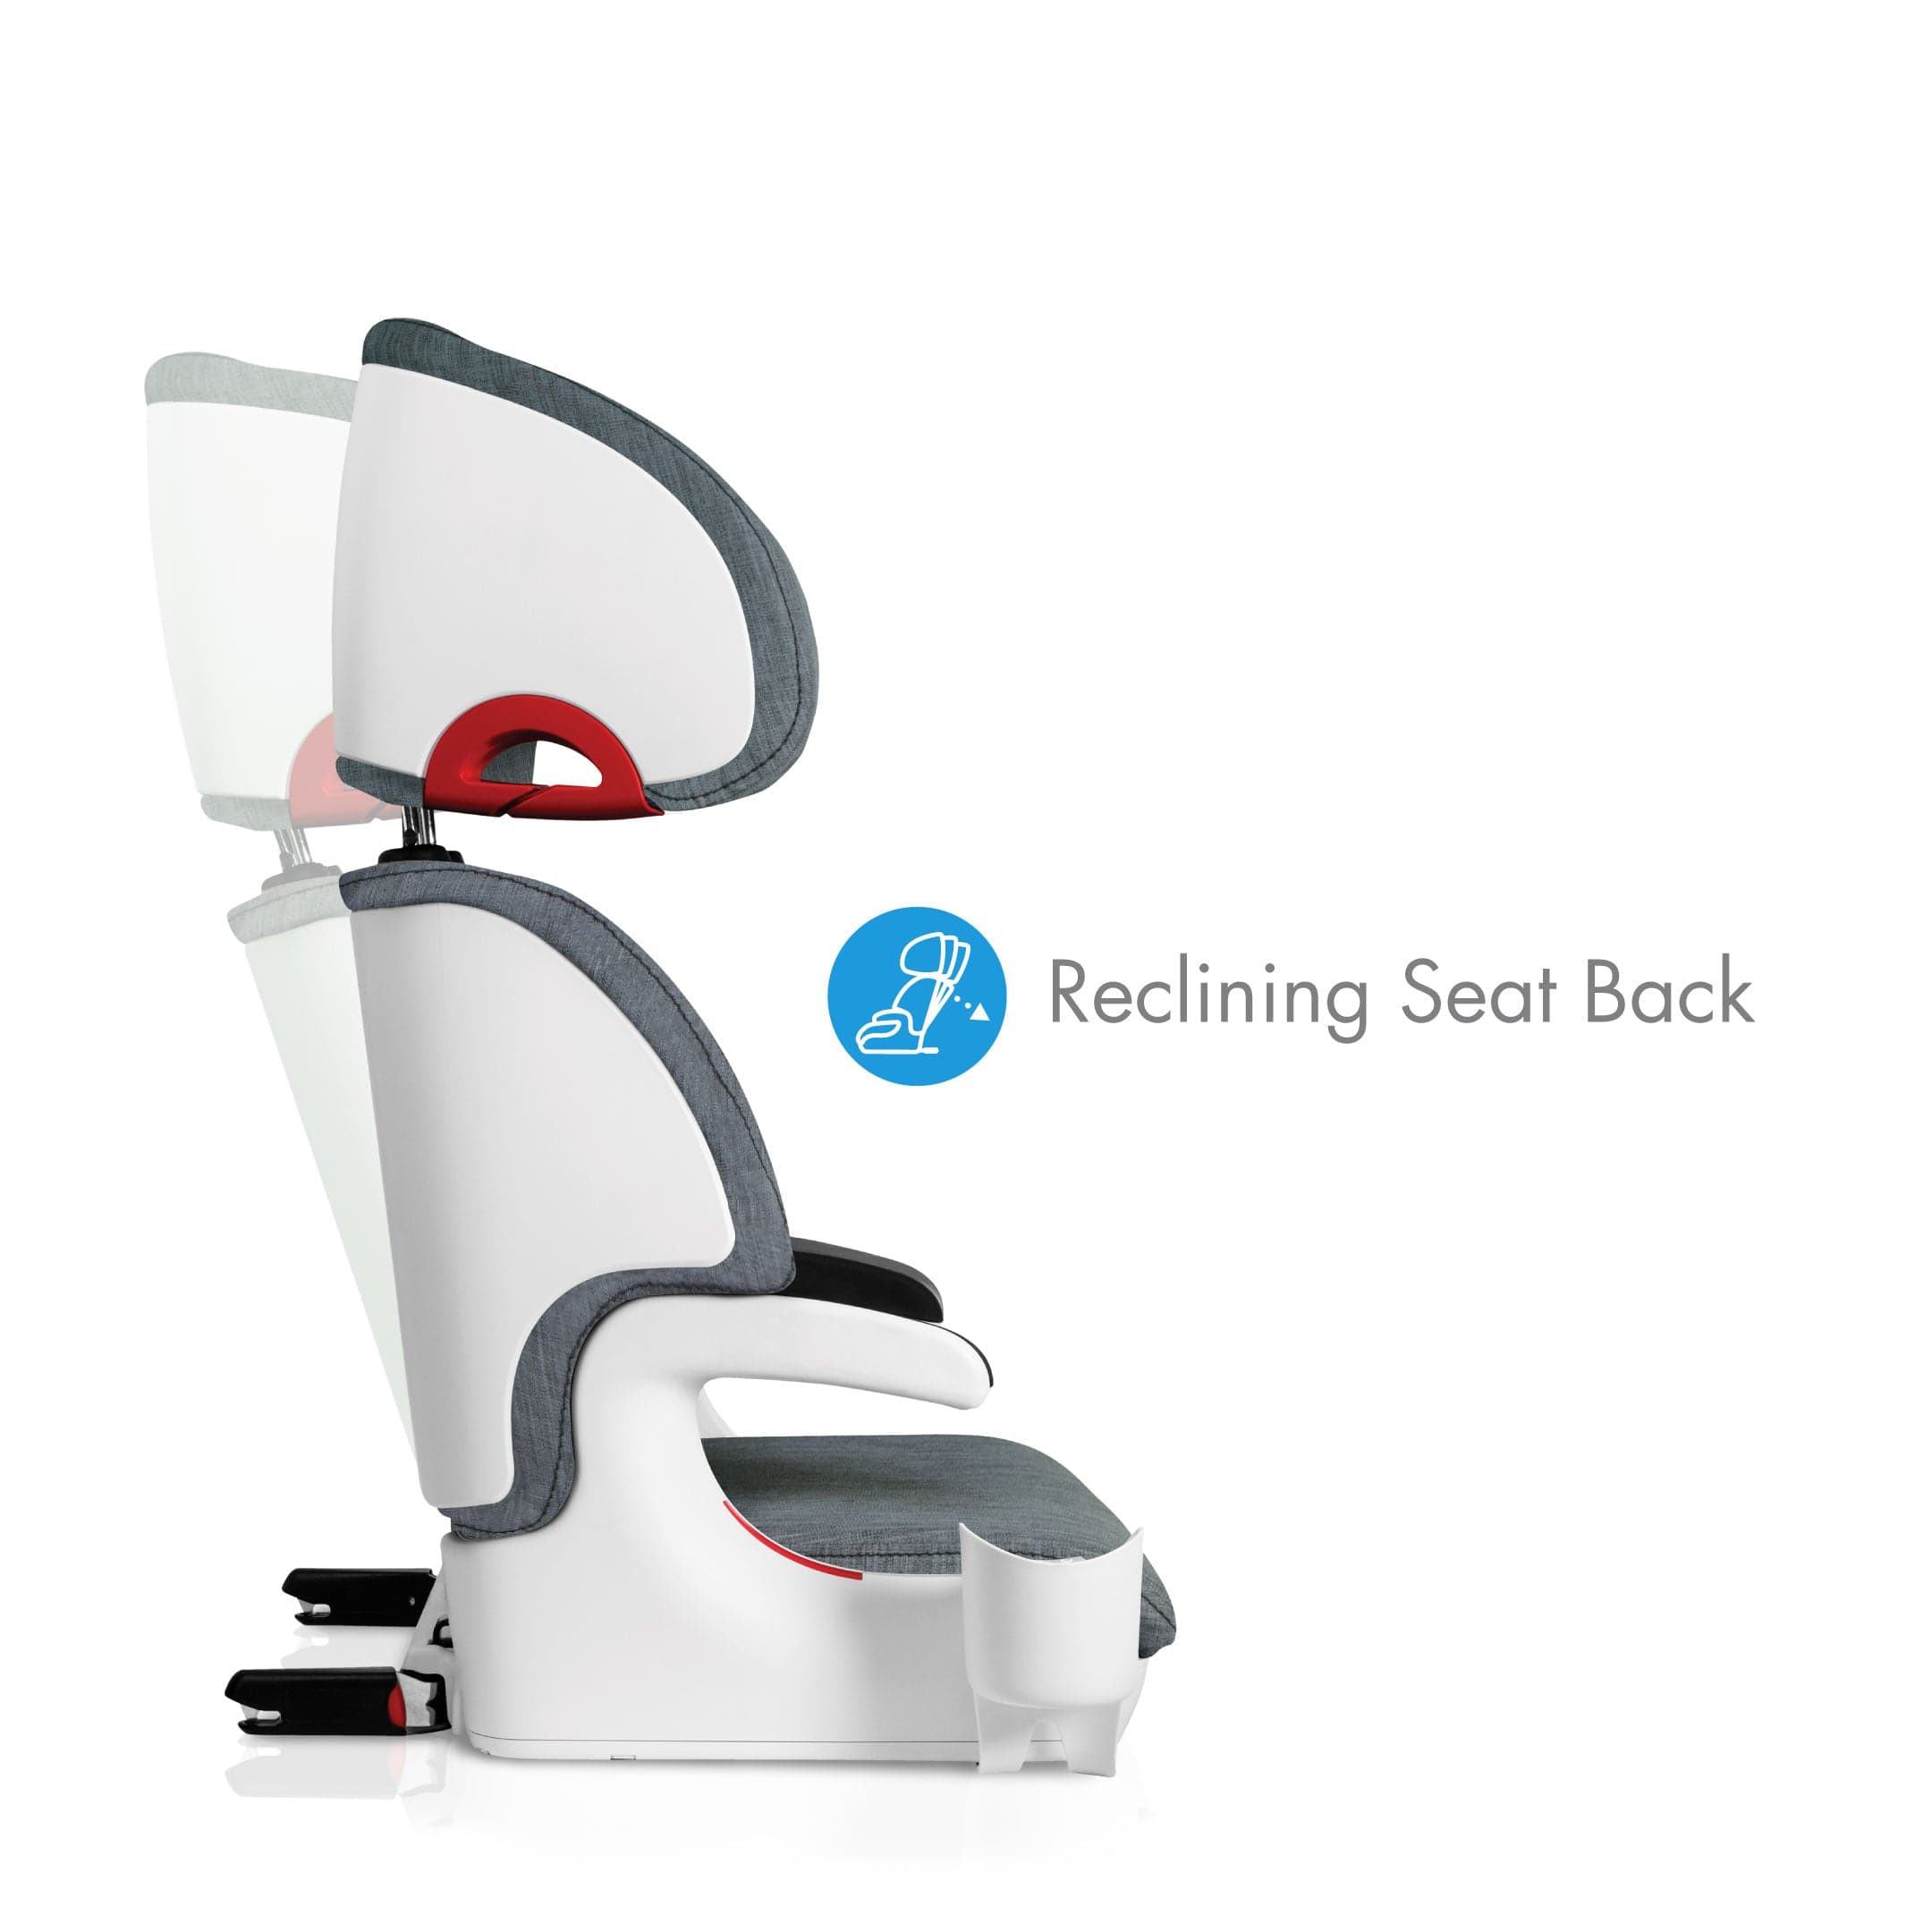 clek oobr recline feature all-groups